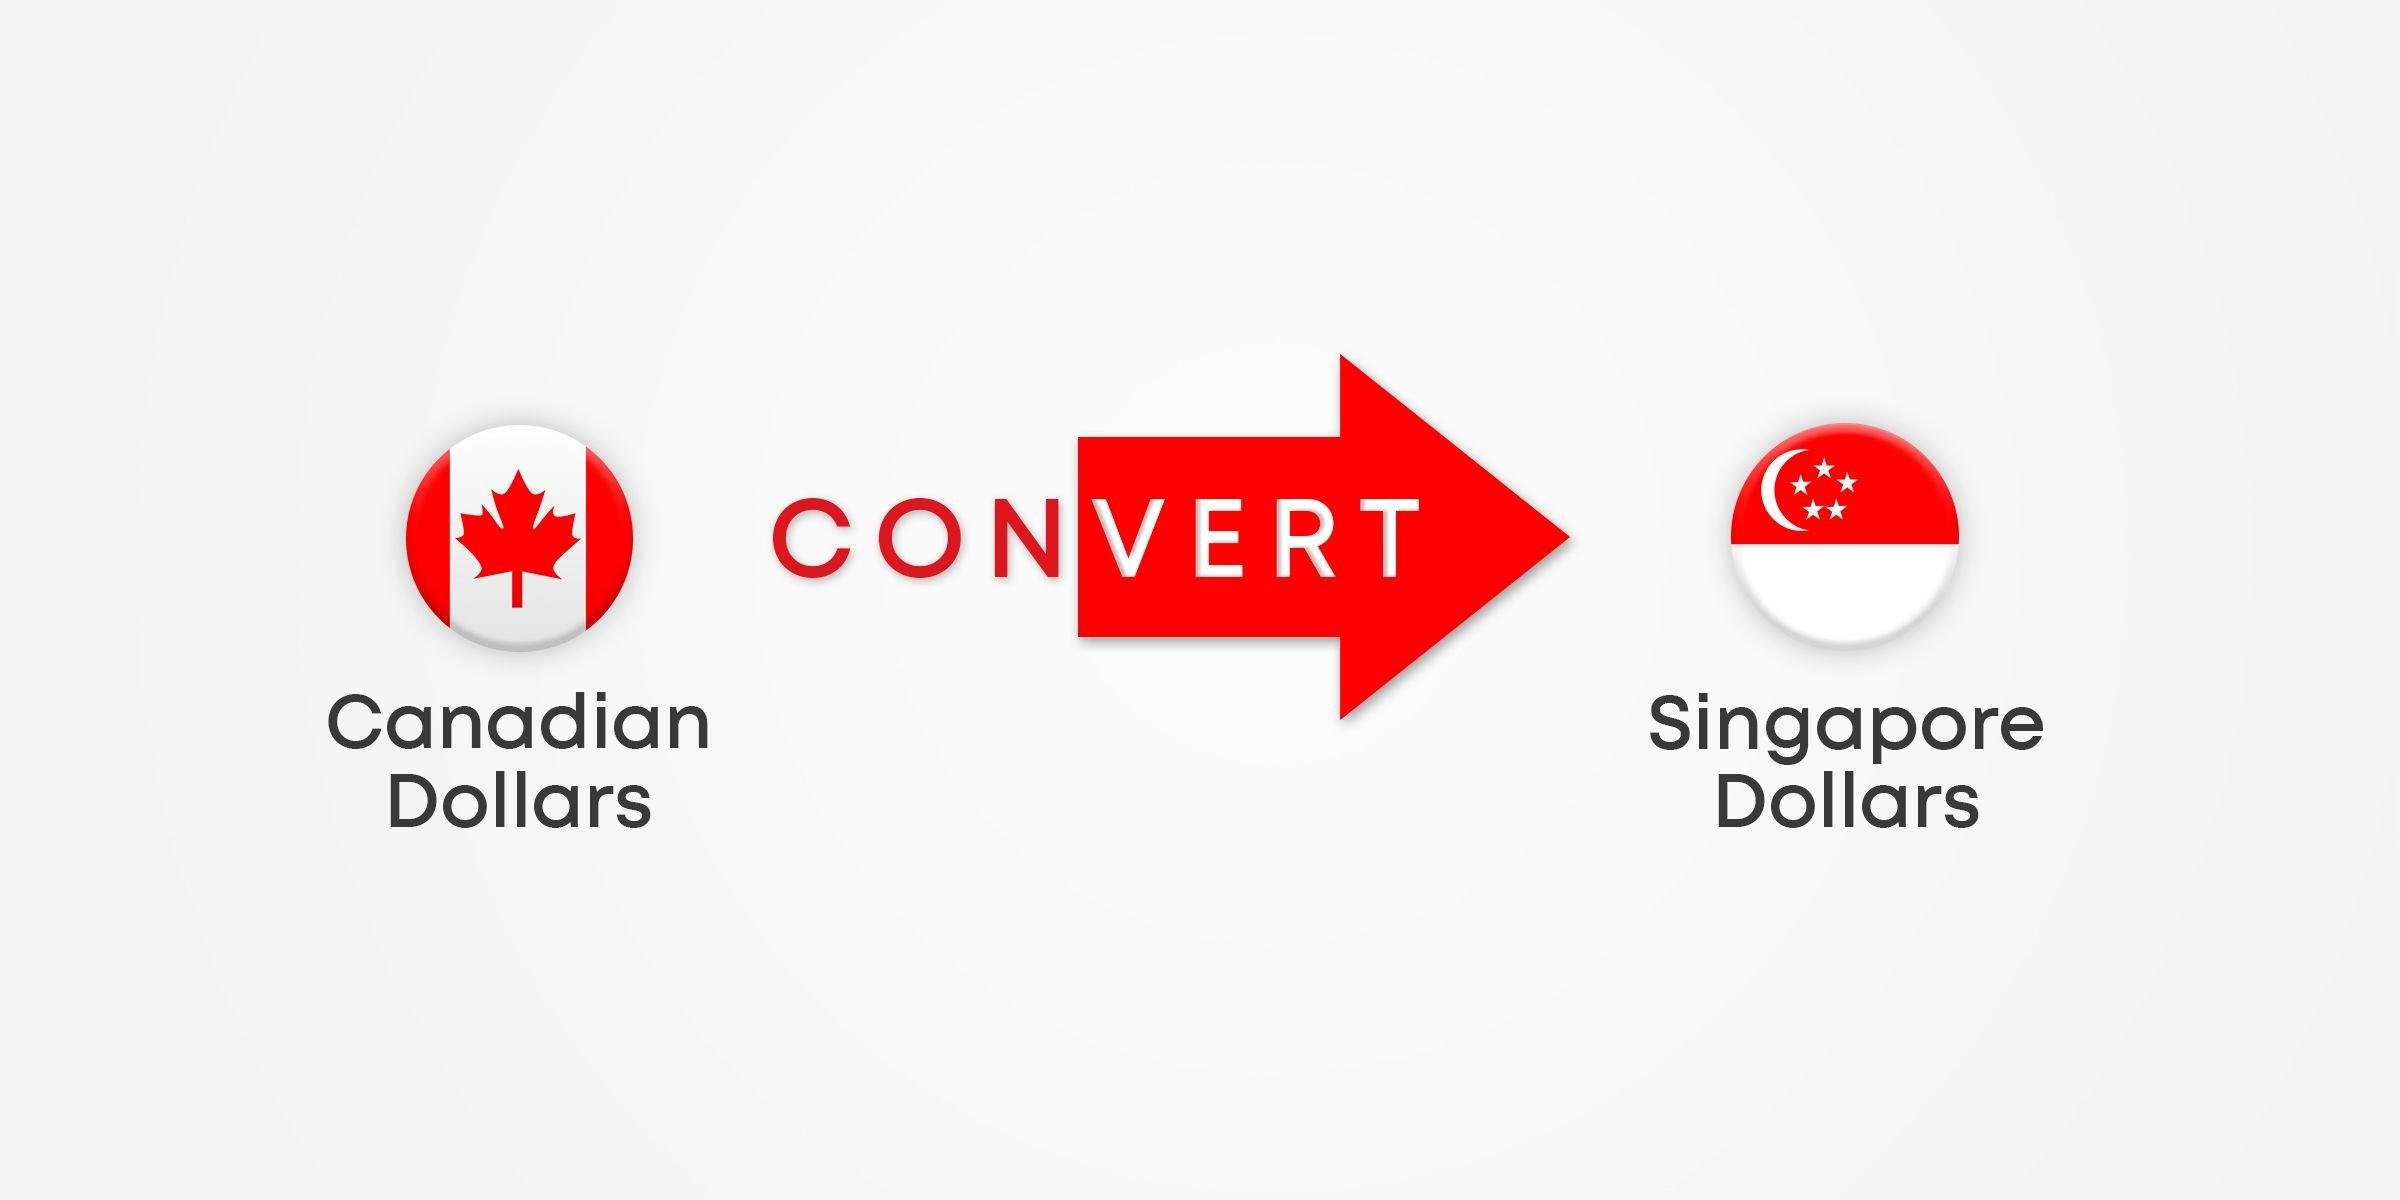 How to Convert Canadian Dollars to Singapore Dollars?